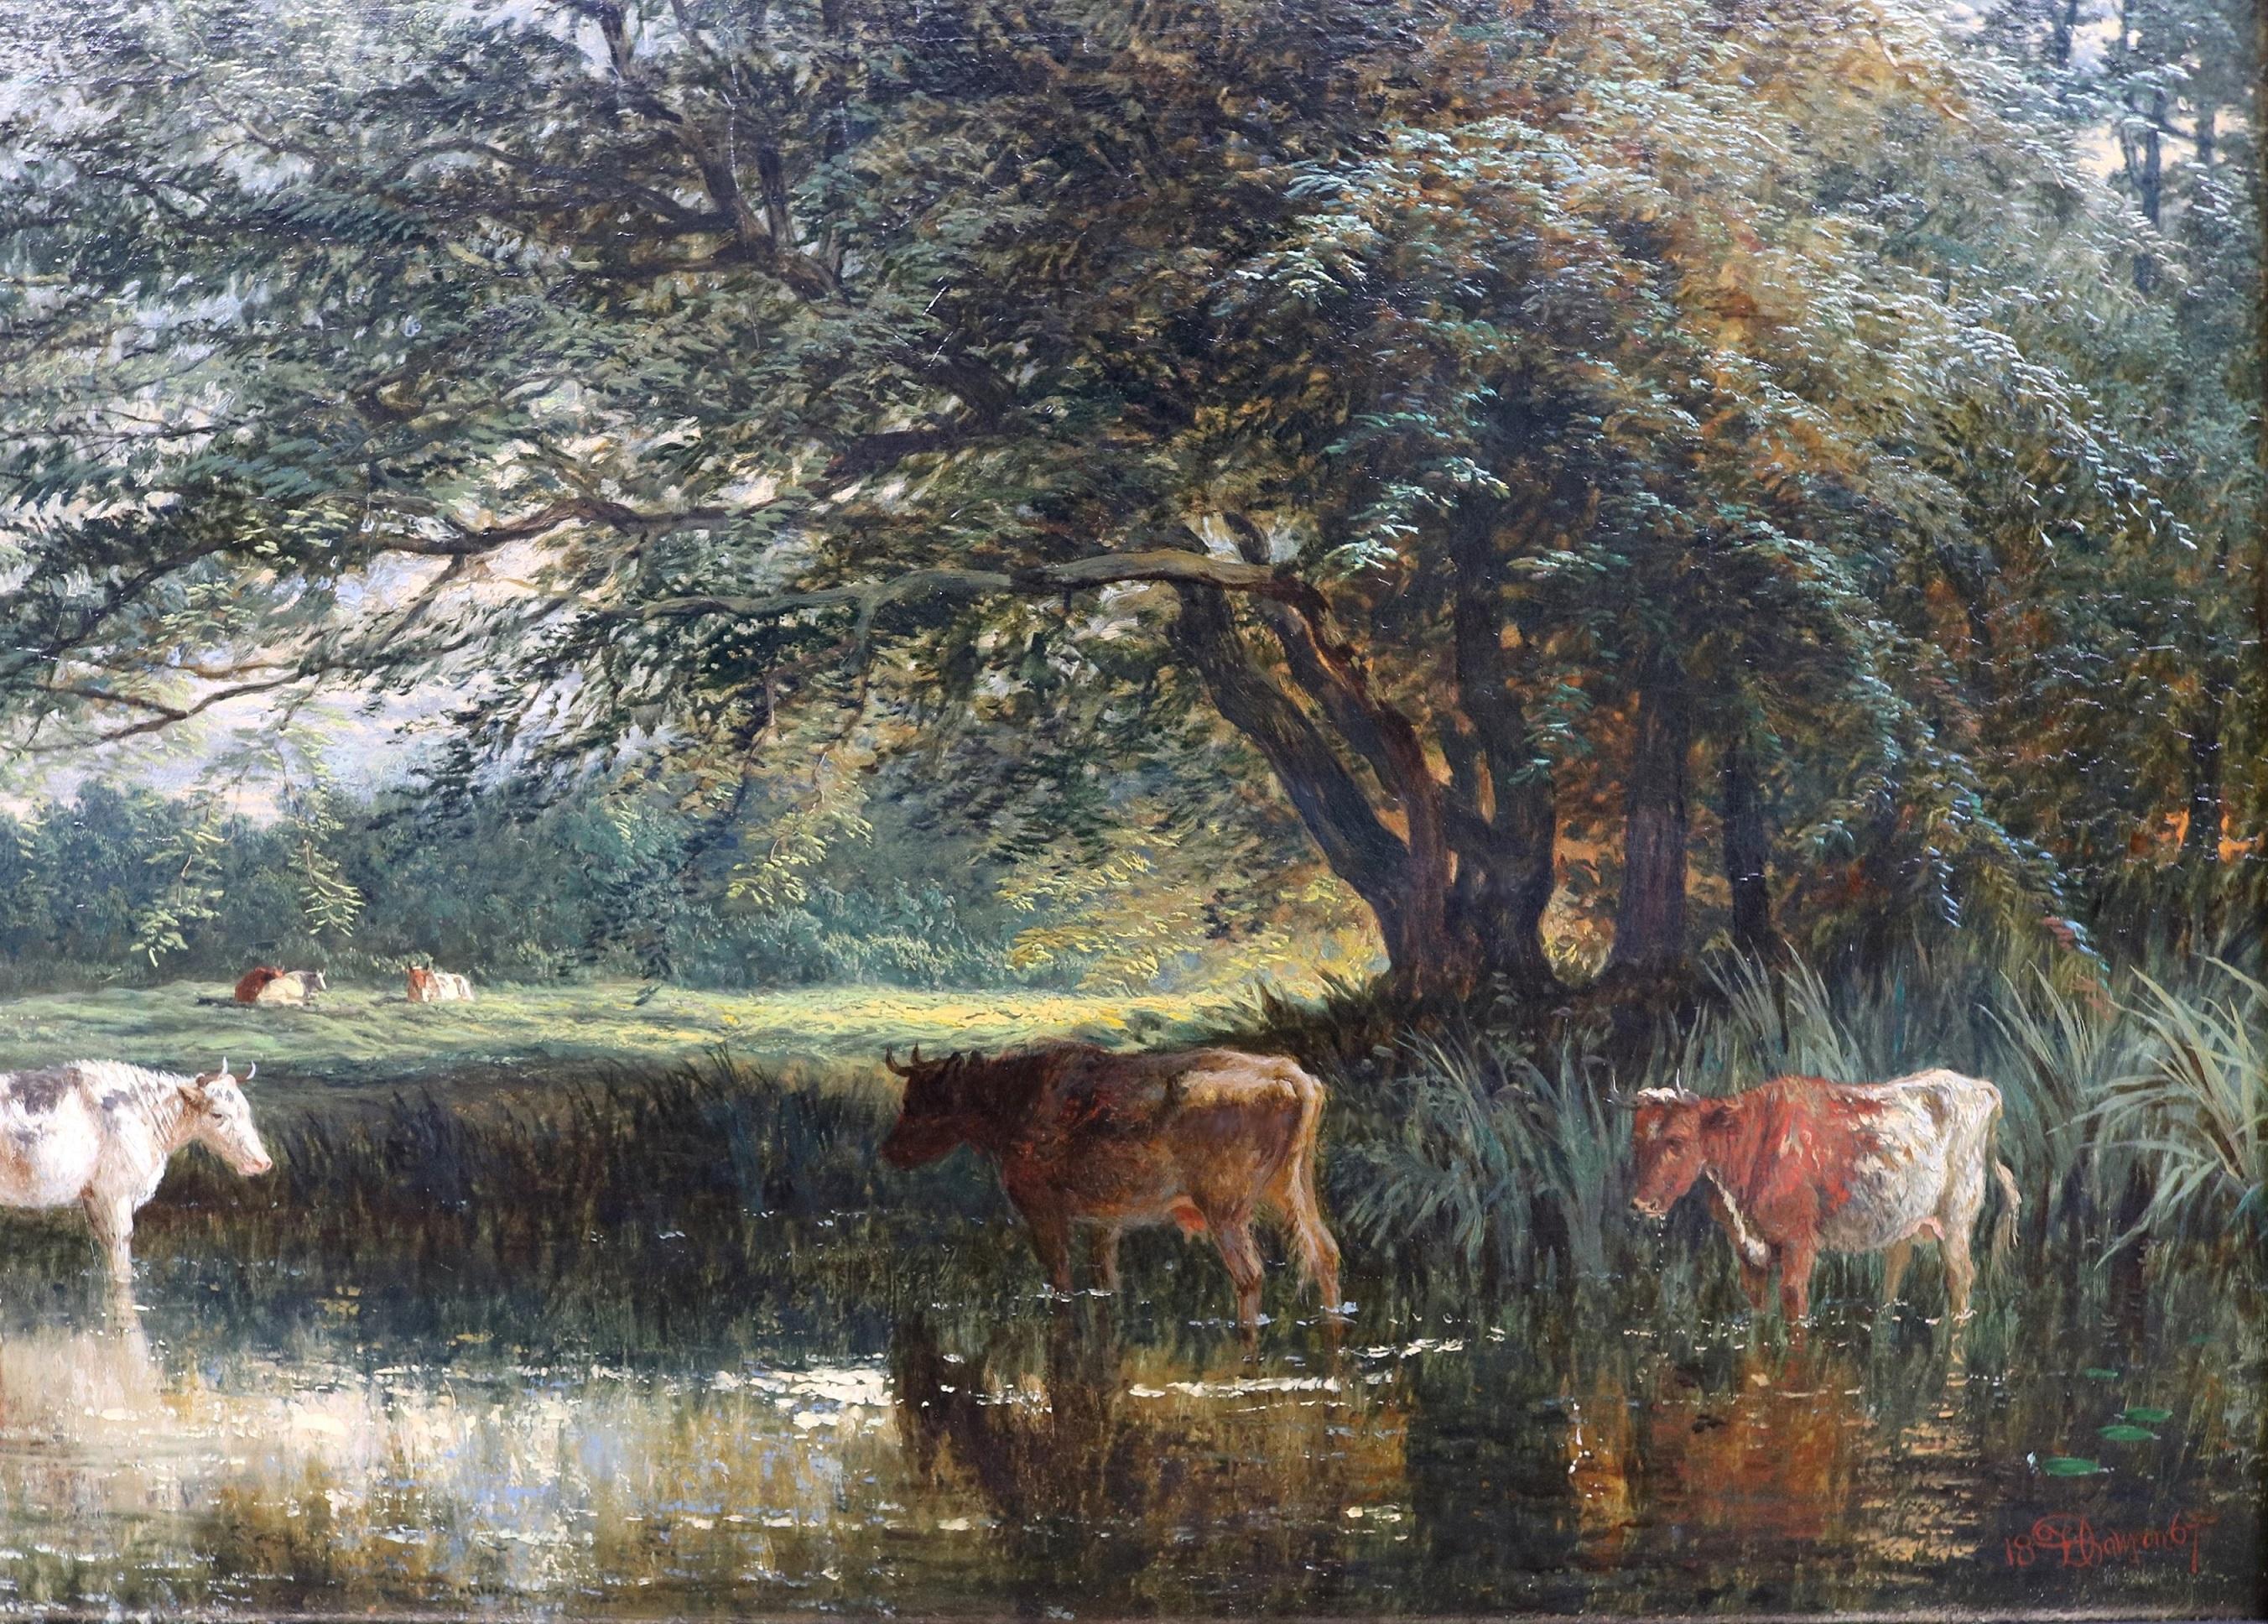 On the Ribble, Summertime - Large 19th Century English Landscape Oil Painting For Sale 1